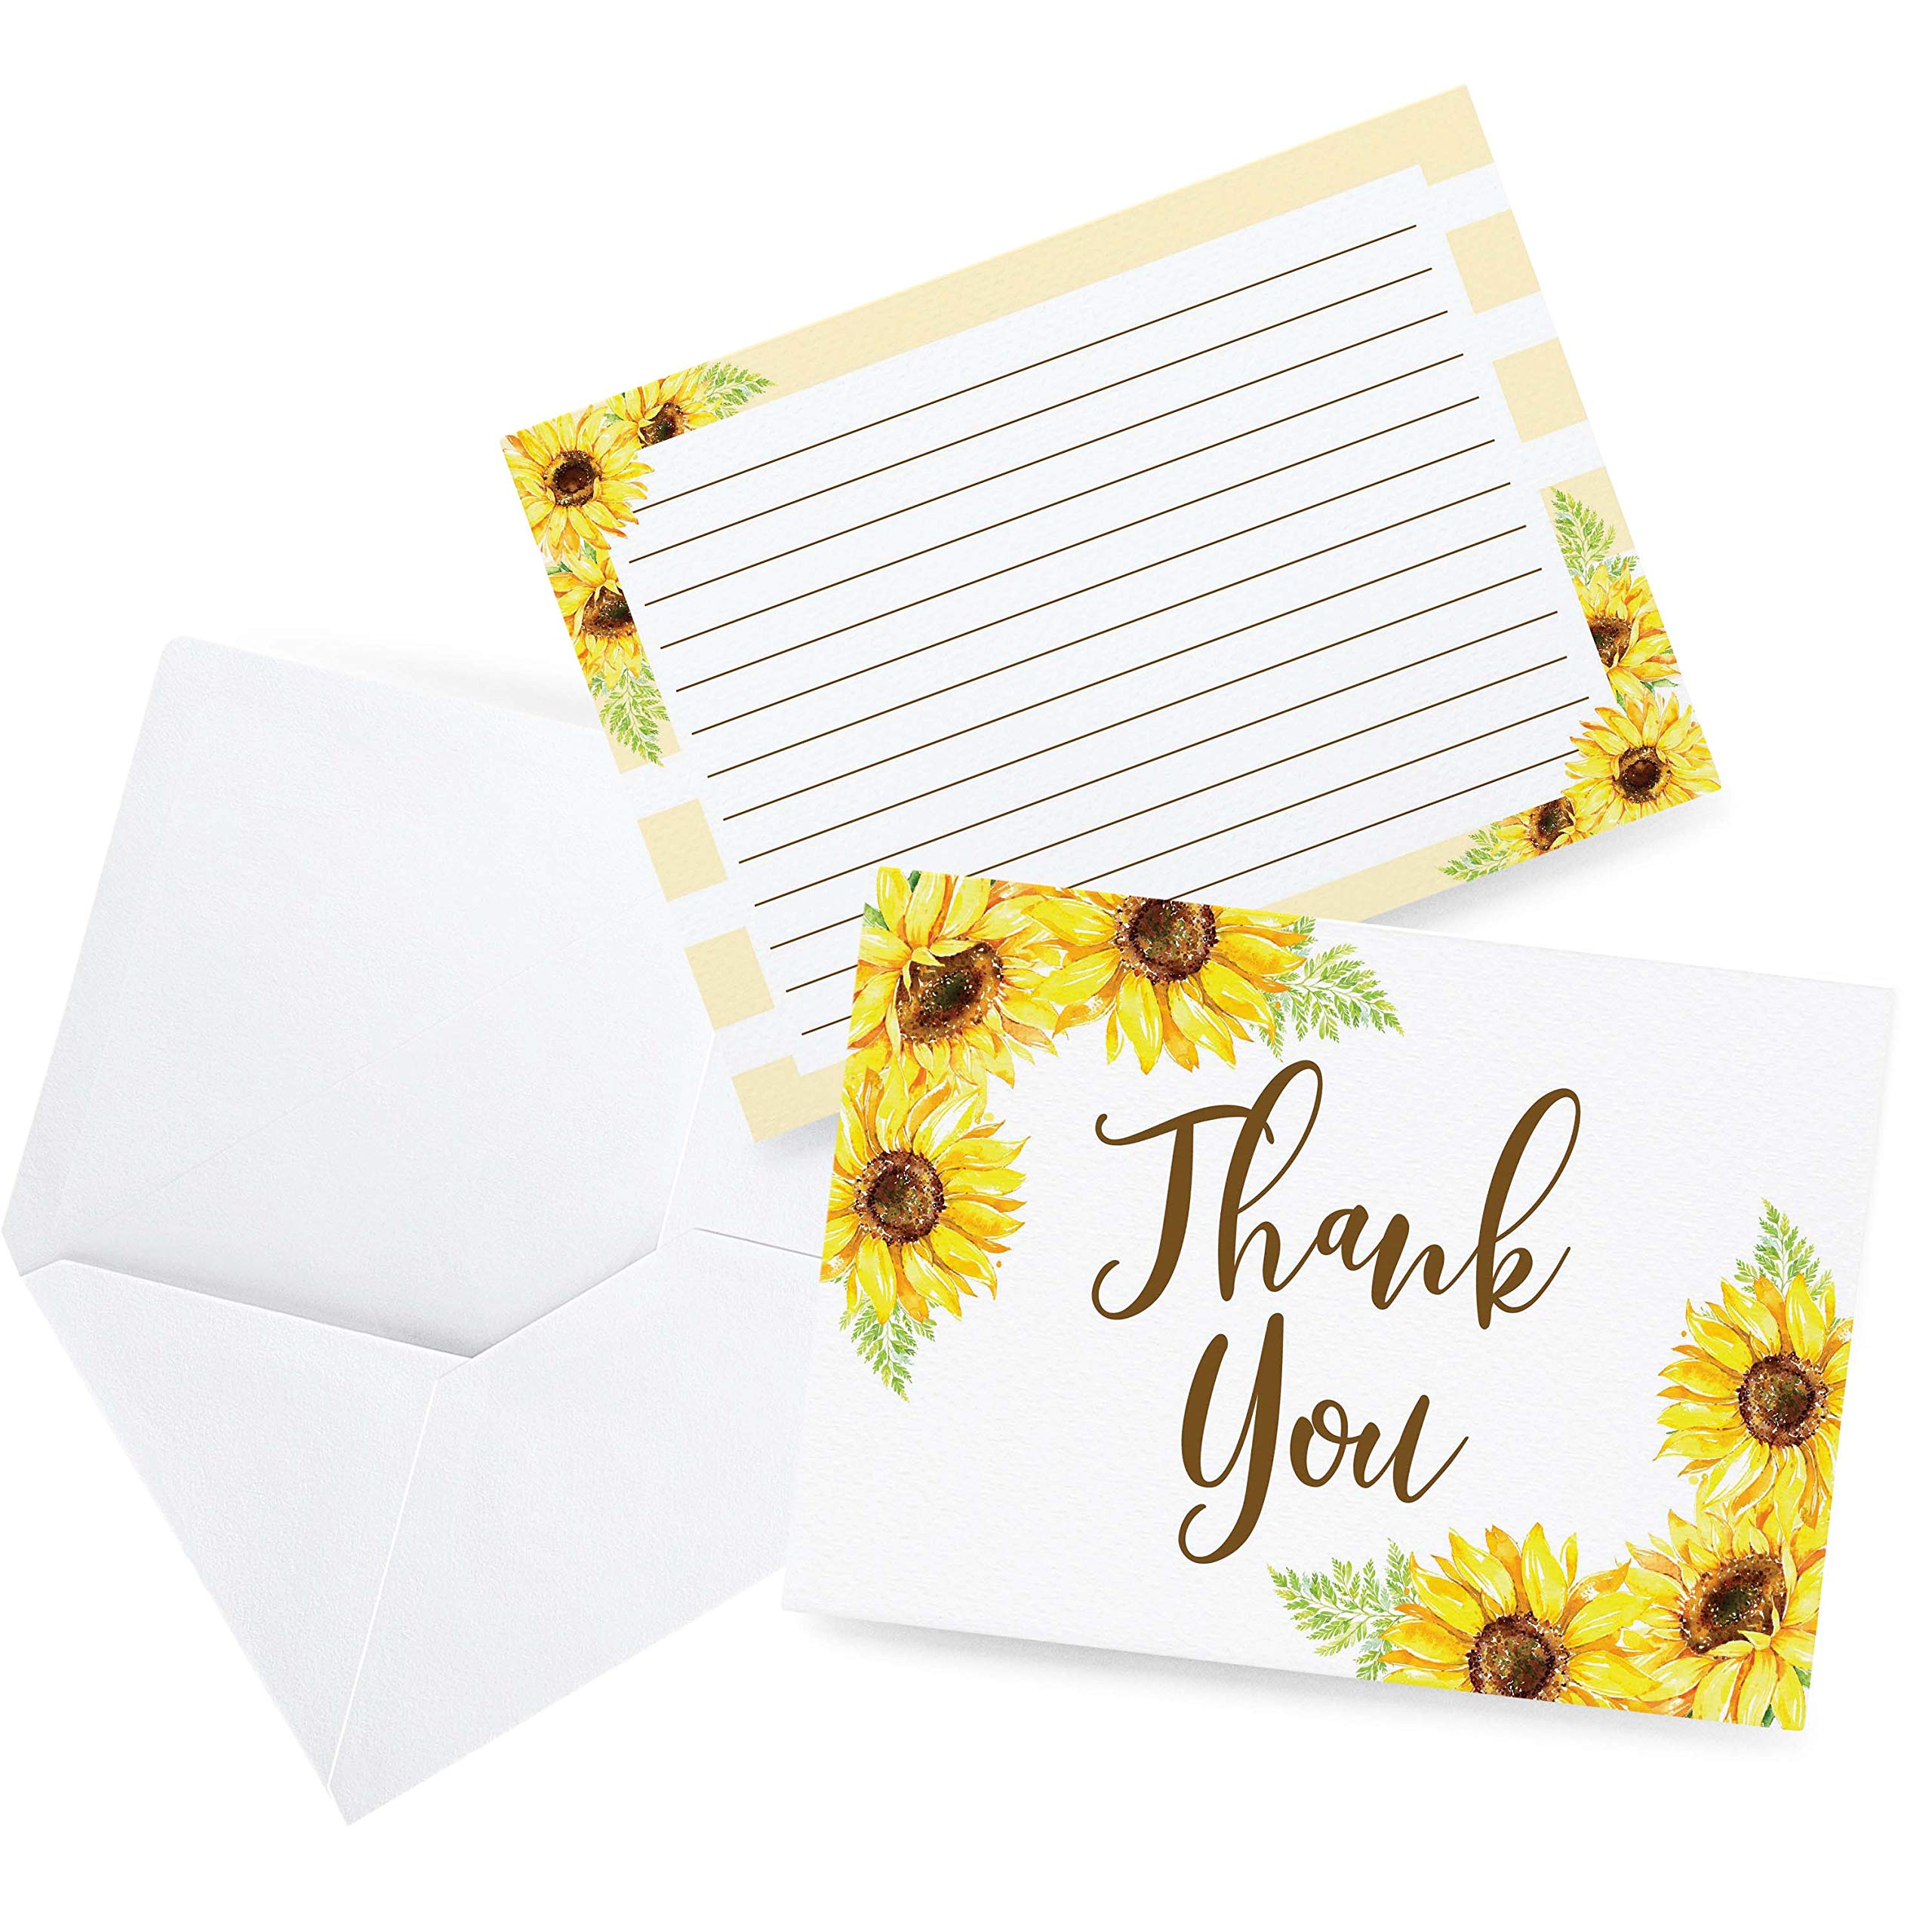 Sunflower Thank You Cards, Great For Baby Wedding Bridal Shower, Birthday, Baptism, Any Occasion, 50 Thank You Cards